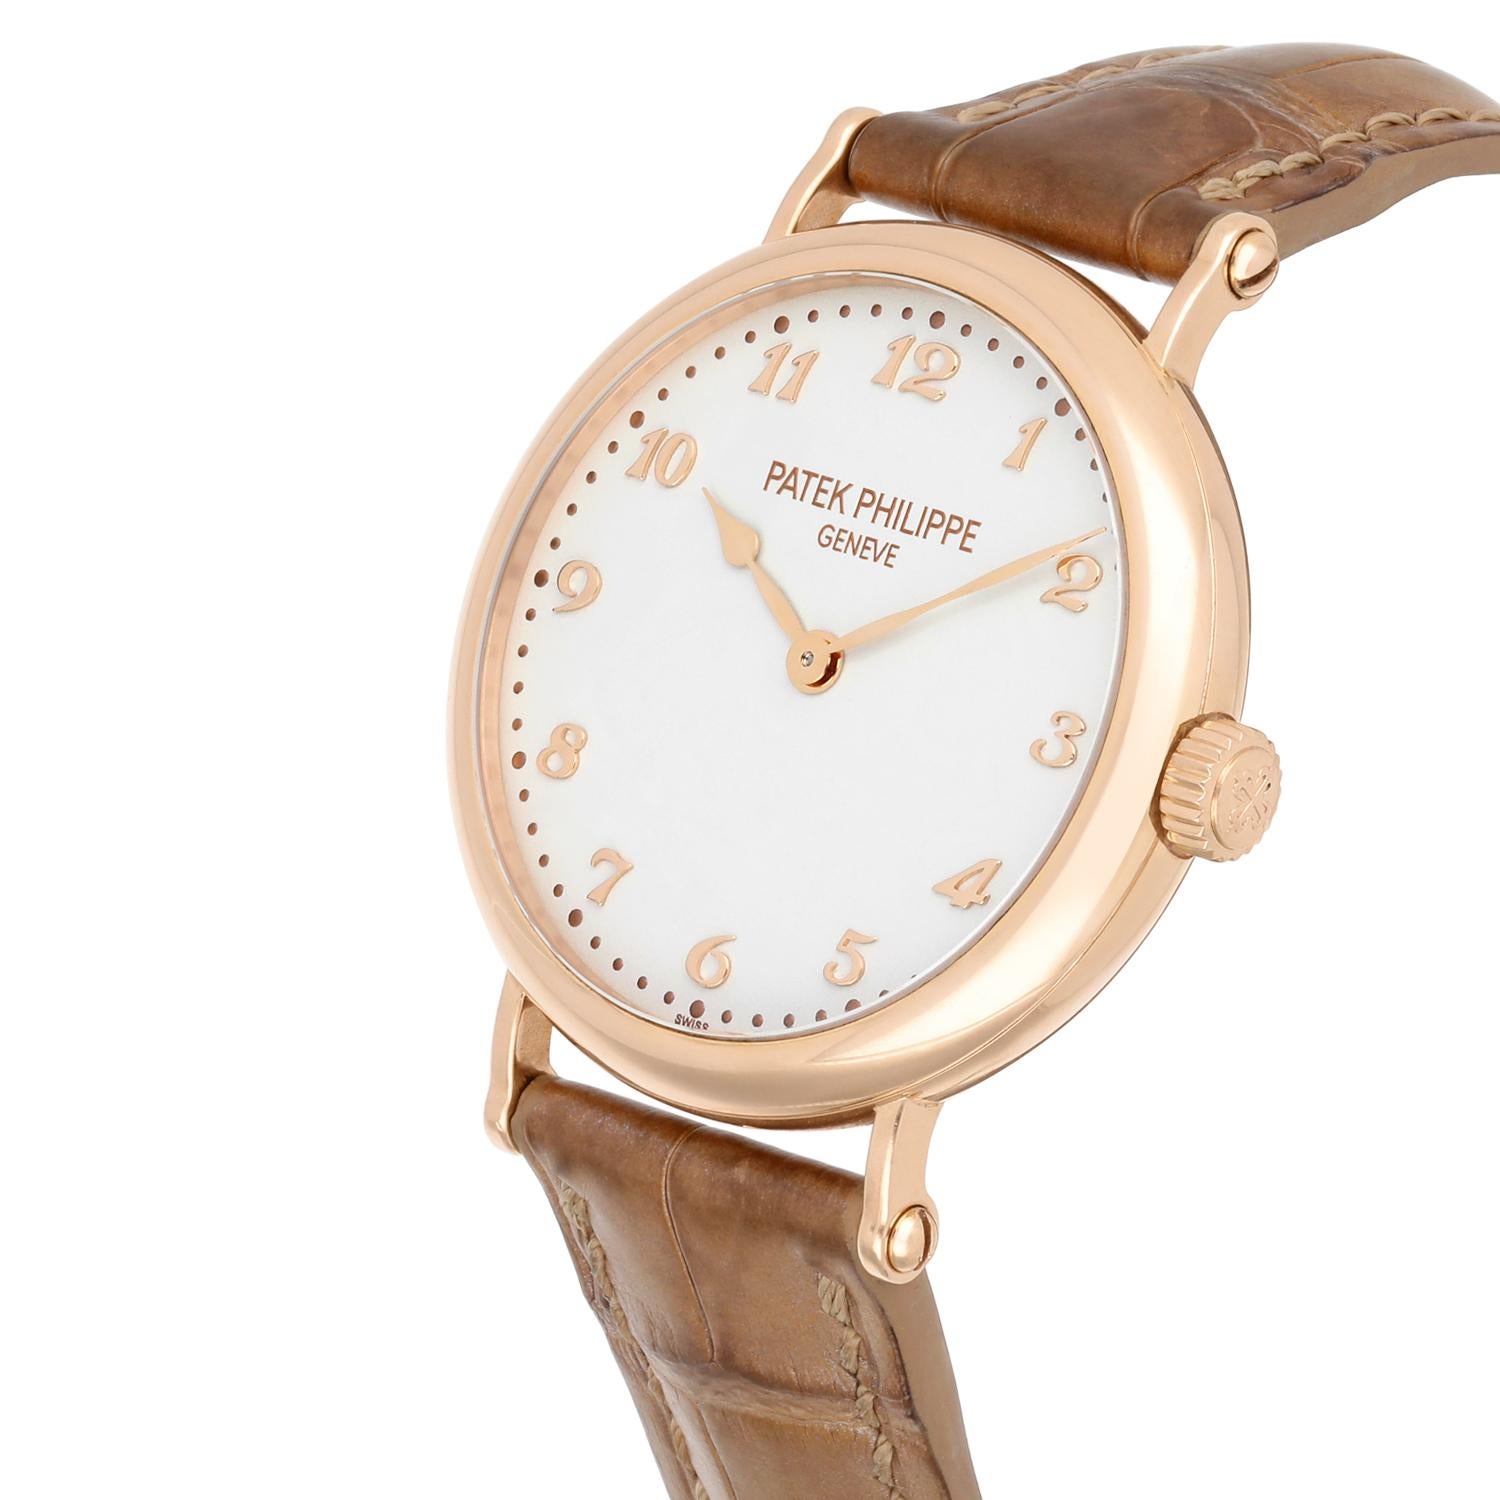 Patek Philippe Calatrava Thin 18kt Rose Gold Automatic Ladies Watch 7200R-001 In Excellent Condition For Sale In New York, NY